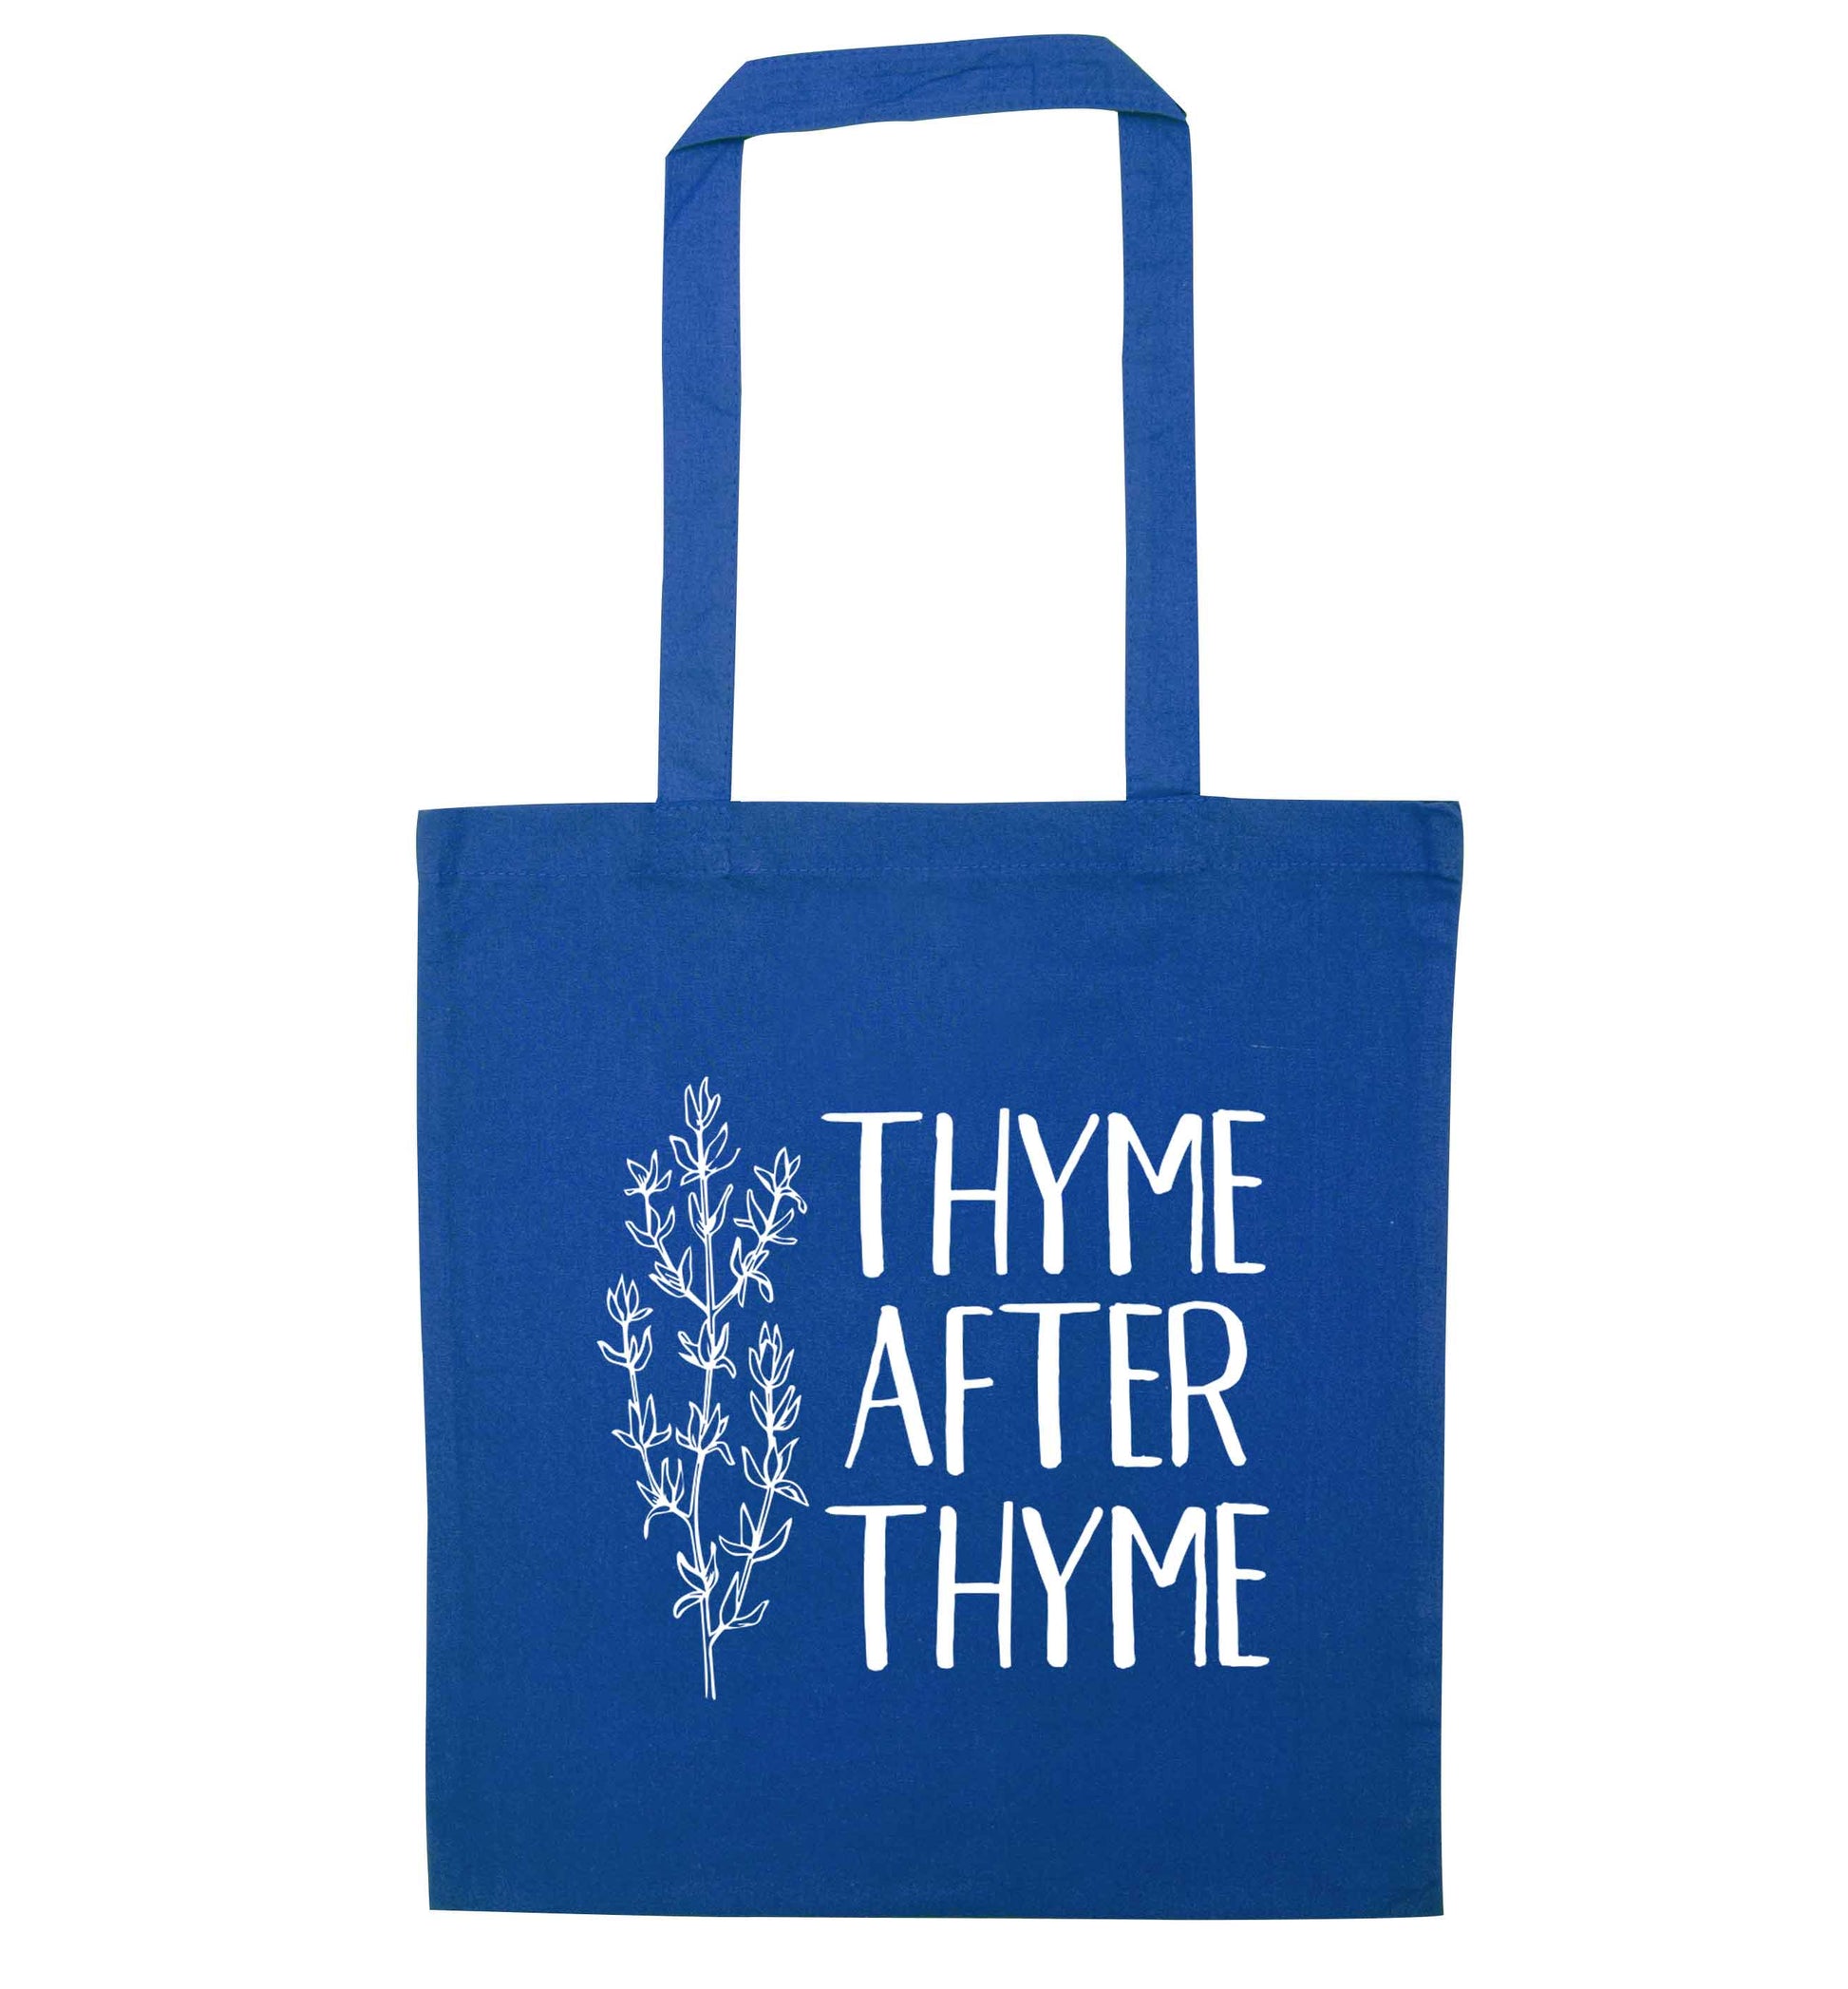 Thyme after thyme blue tote bag